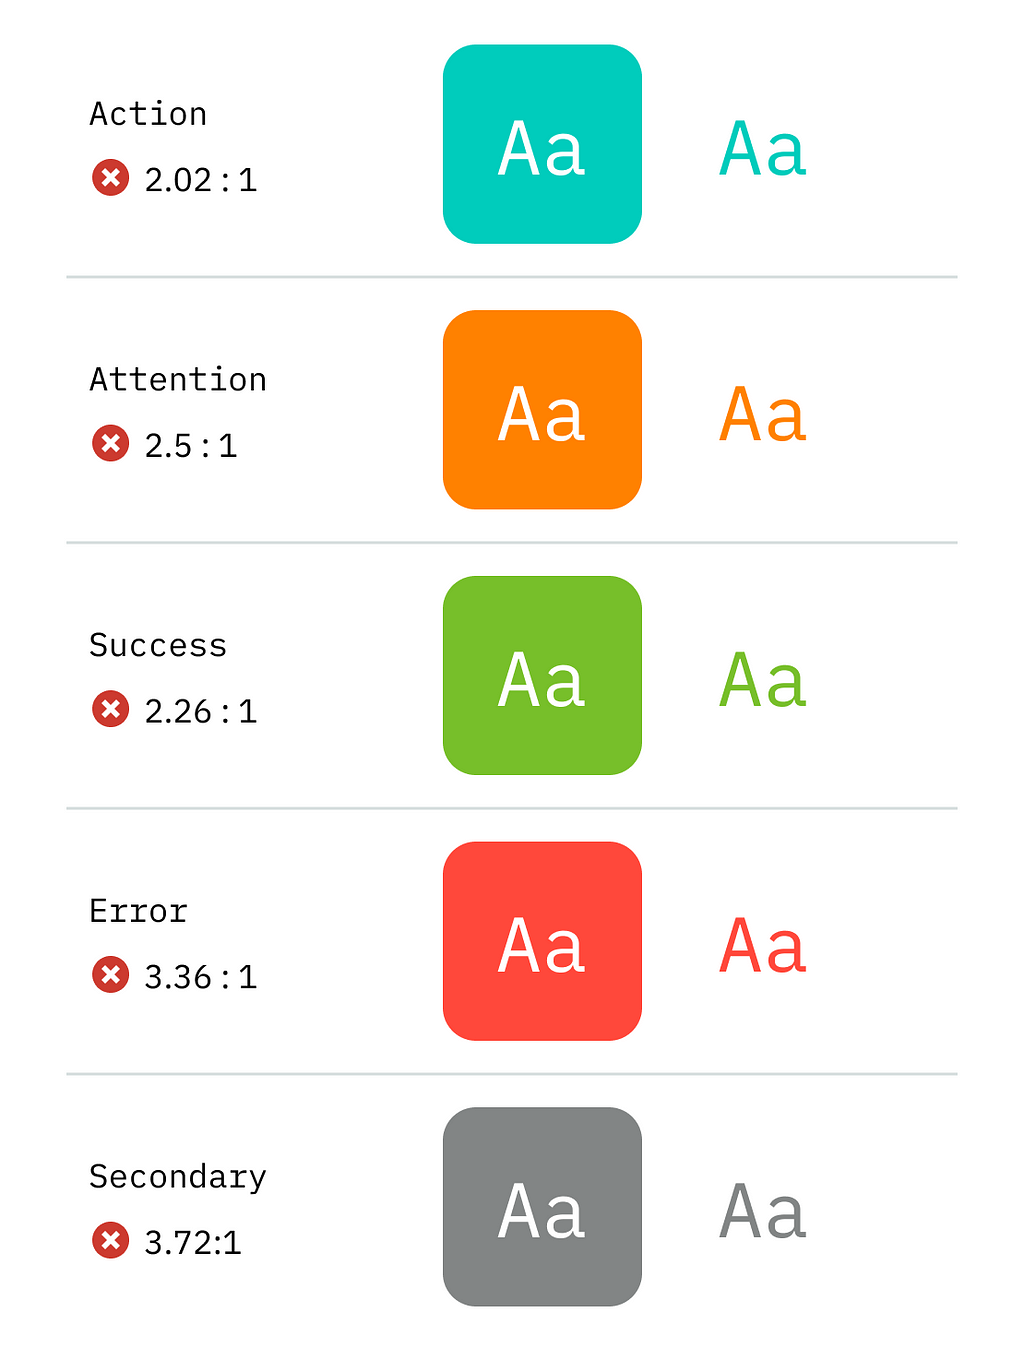 Table showing the colour contrast ratio of the five most used colours in Deliveroo’s digital products: teal for action, orange for attention, green for success, red for error and grey for secondary texts. All colours failed to pass AA level, which requires a 4.5:1 minimum contrast